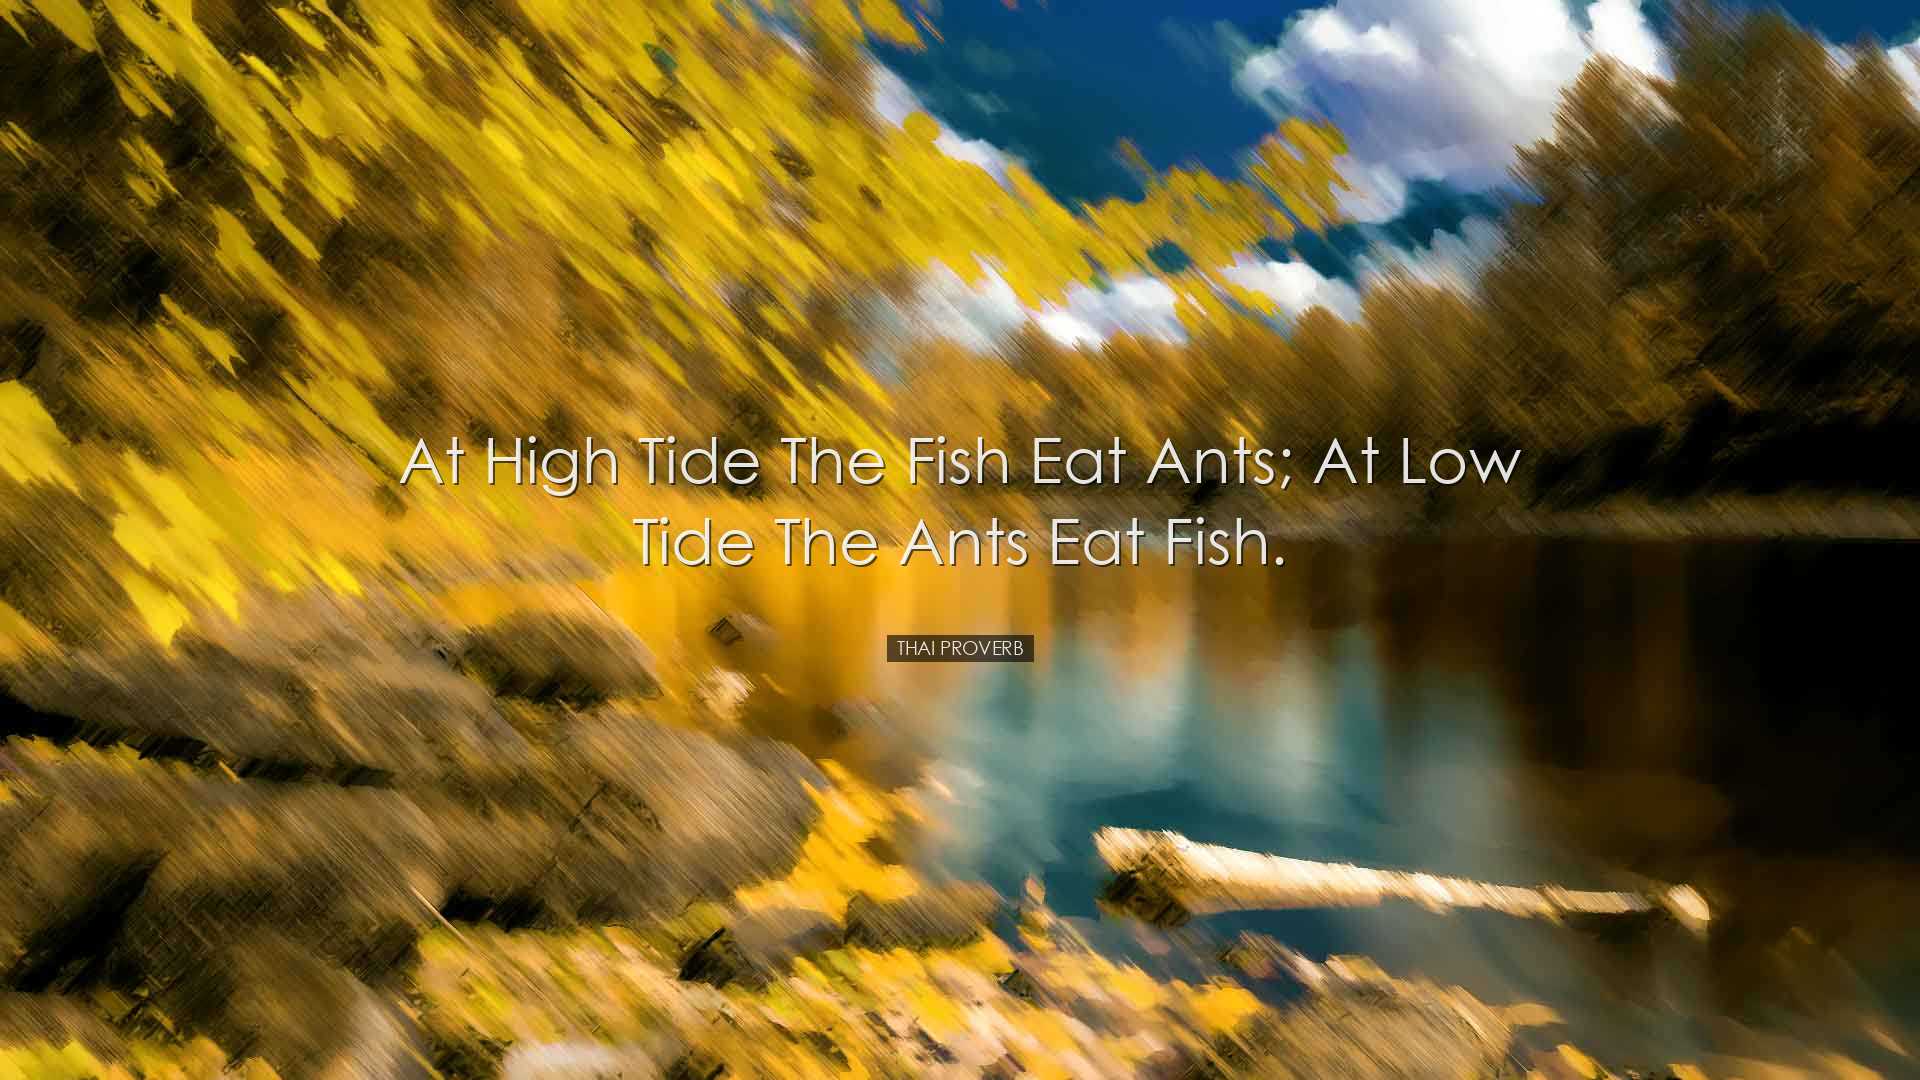 At high tide the fish eat ants; at low tide the ants eat fish. - T